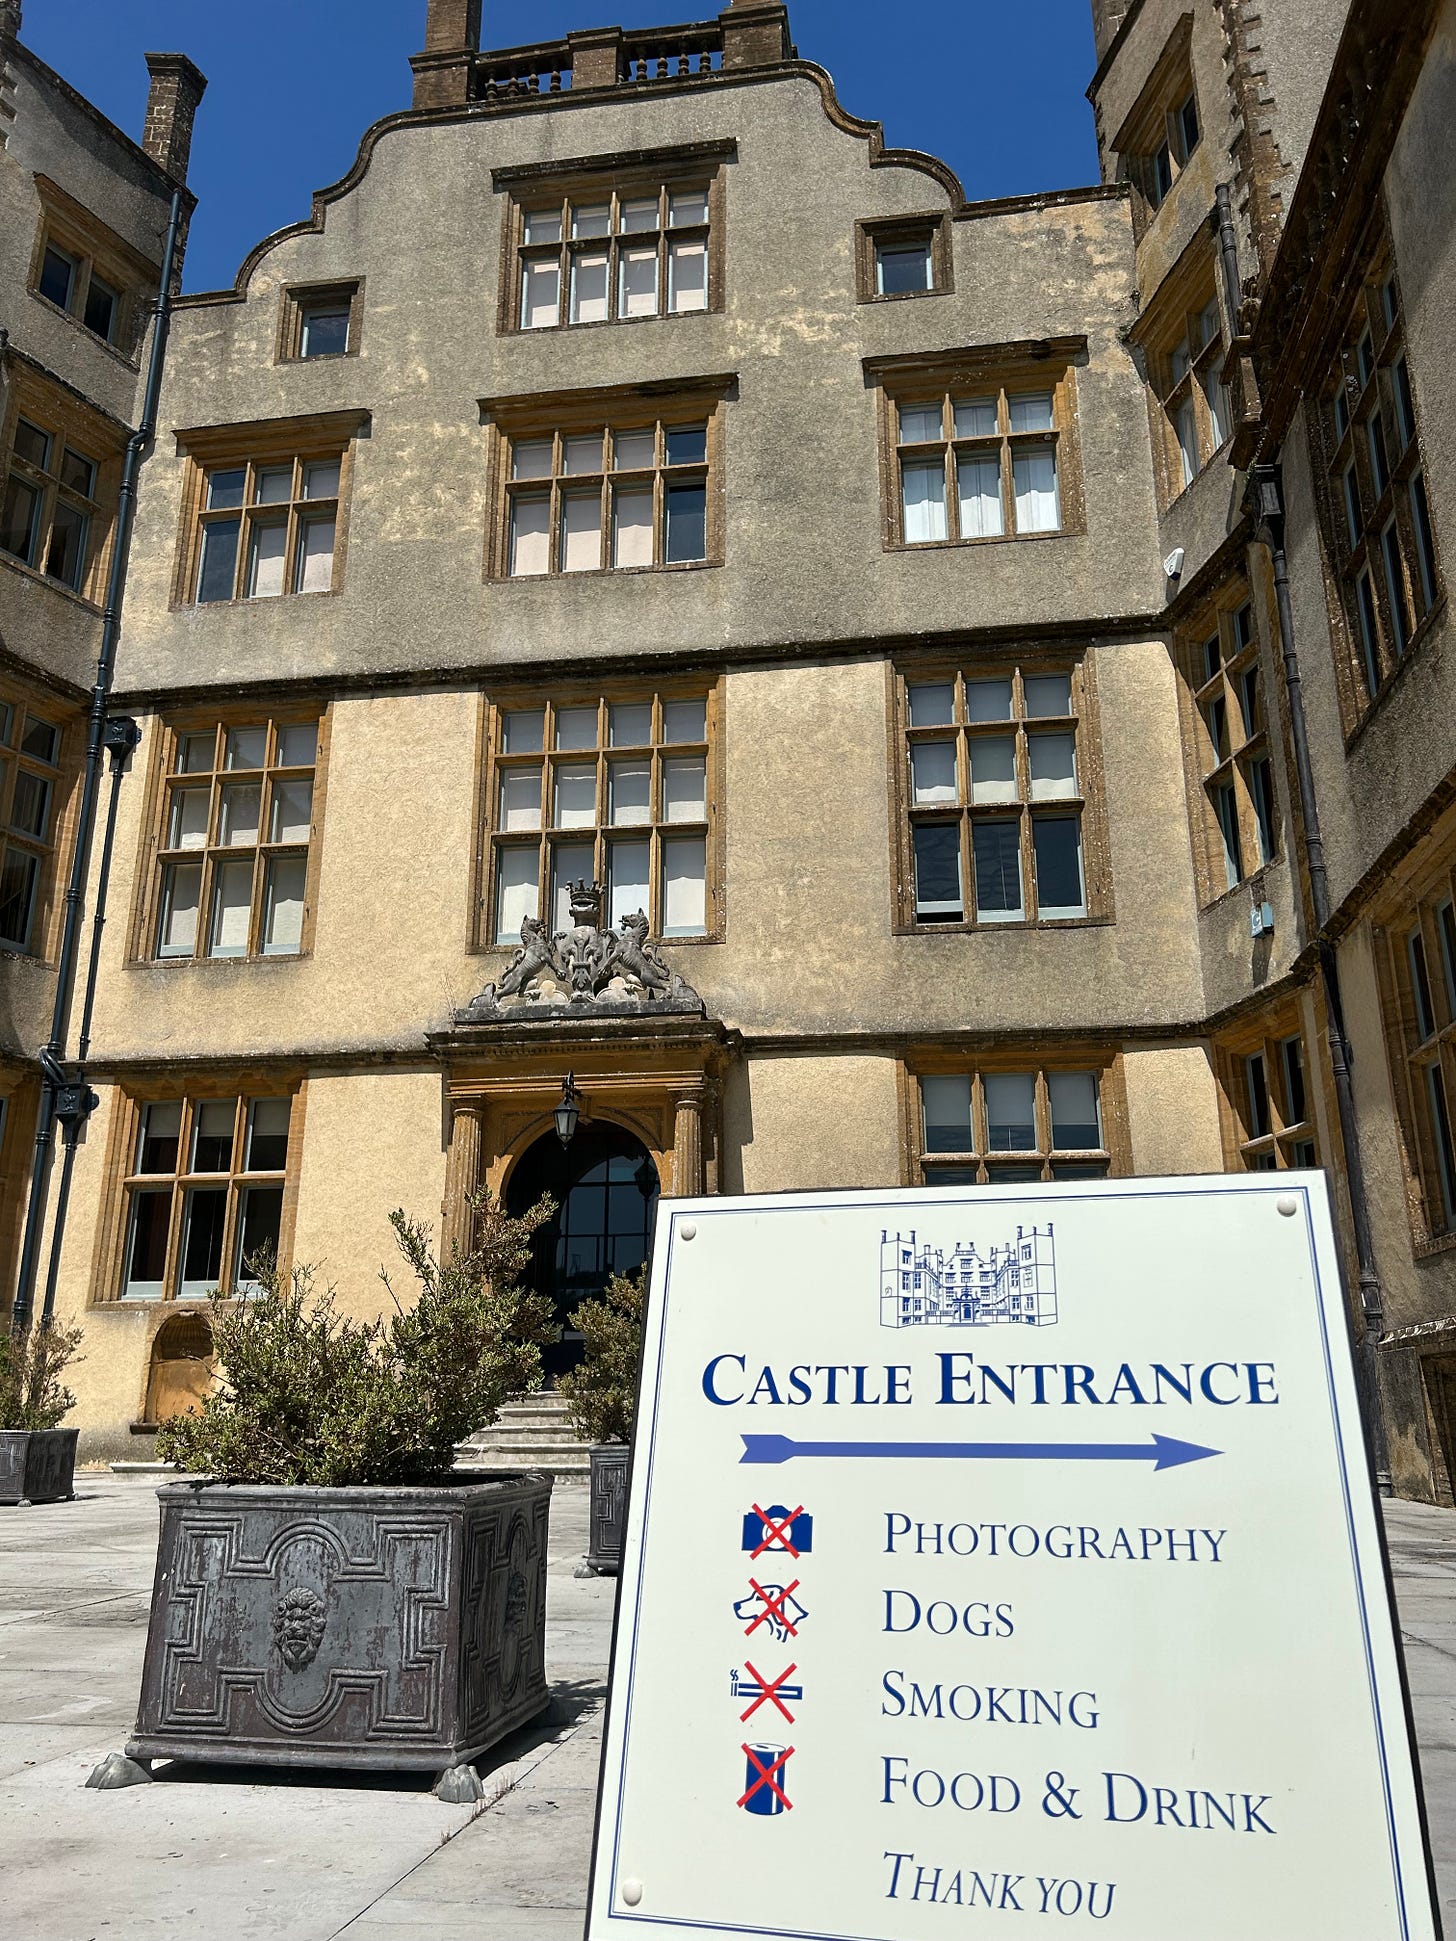 The front entrance to Sherborne New Castle and the starting point for the guided tour of the house. Image: Roland's Travels 